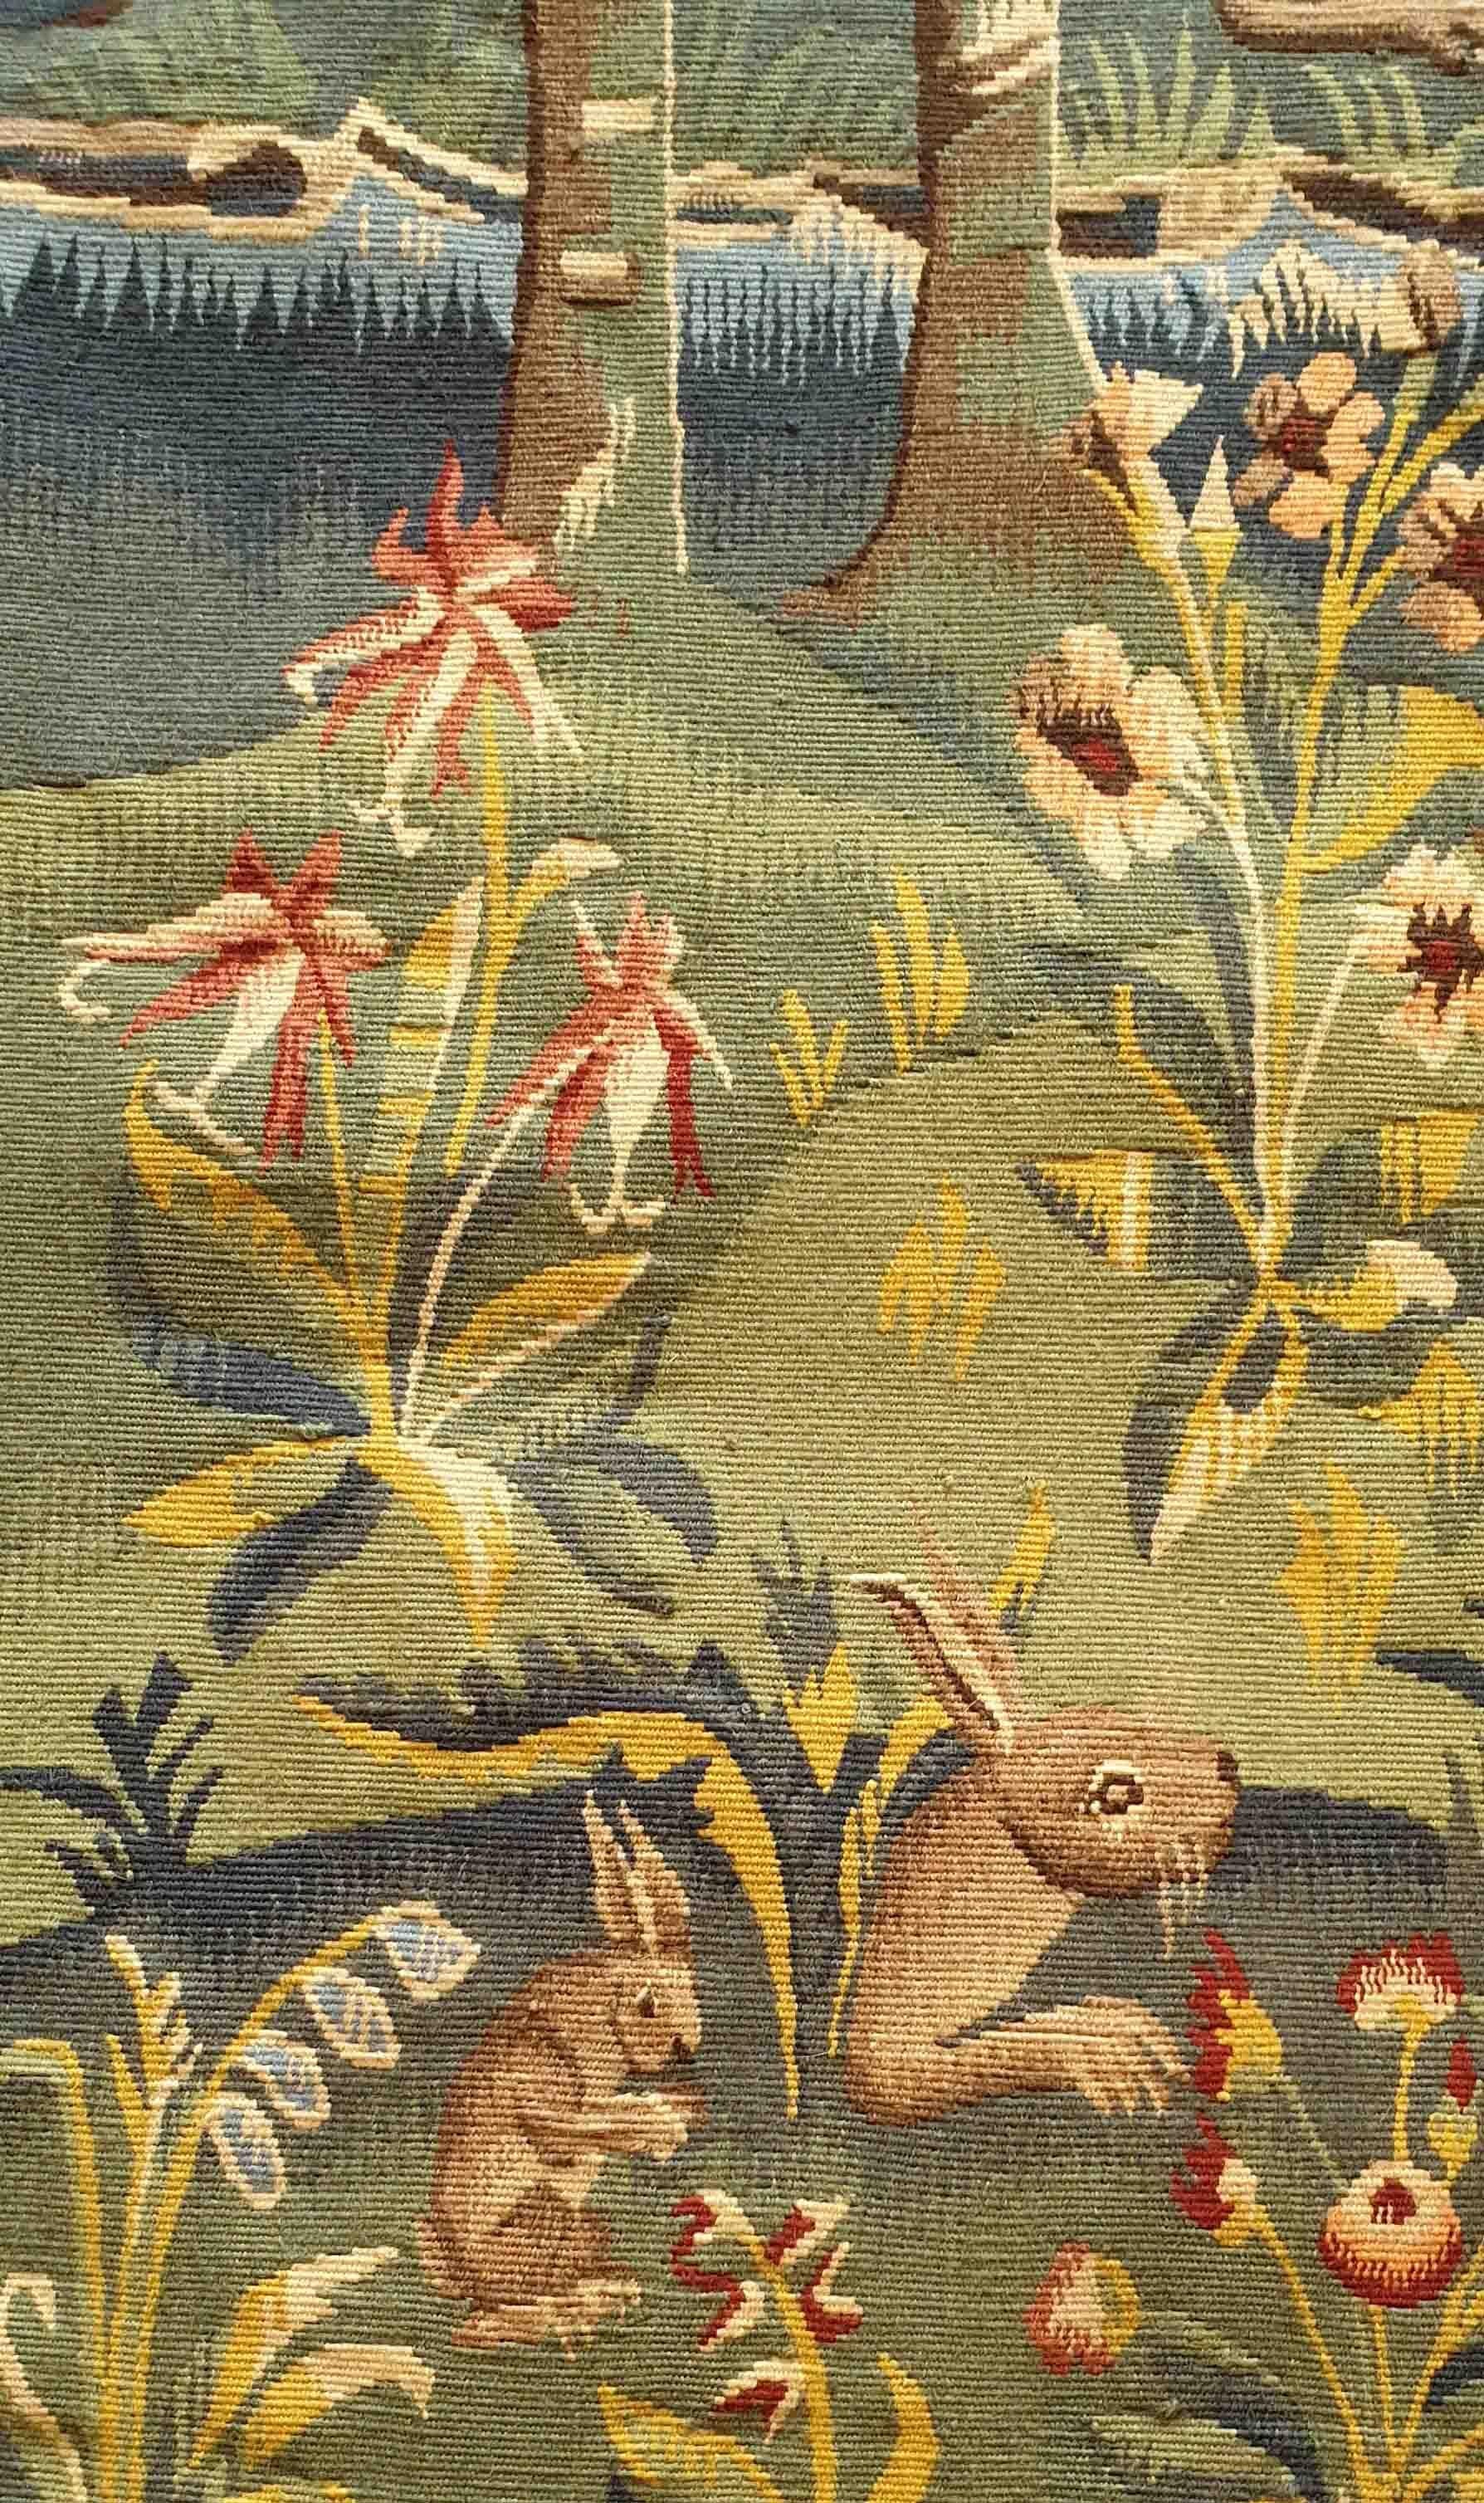  Thousand Flowers Mediaeval Tapestry Made in the 19th Century - N° 765 4